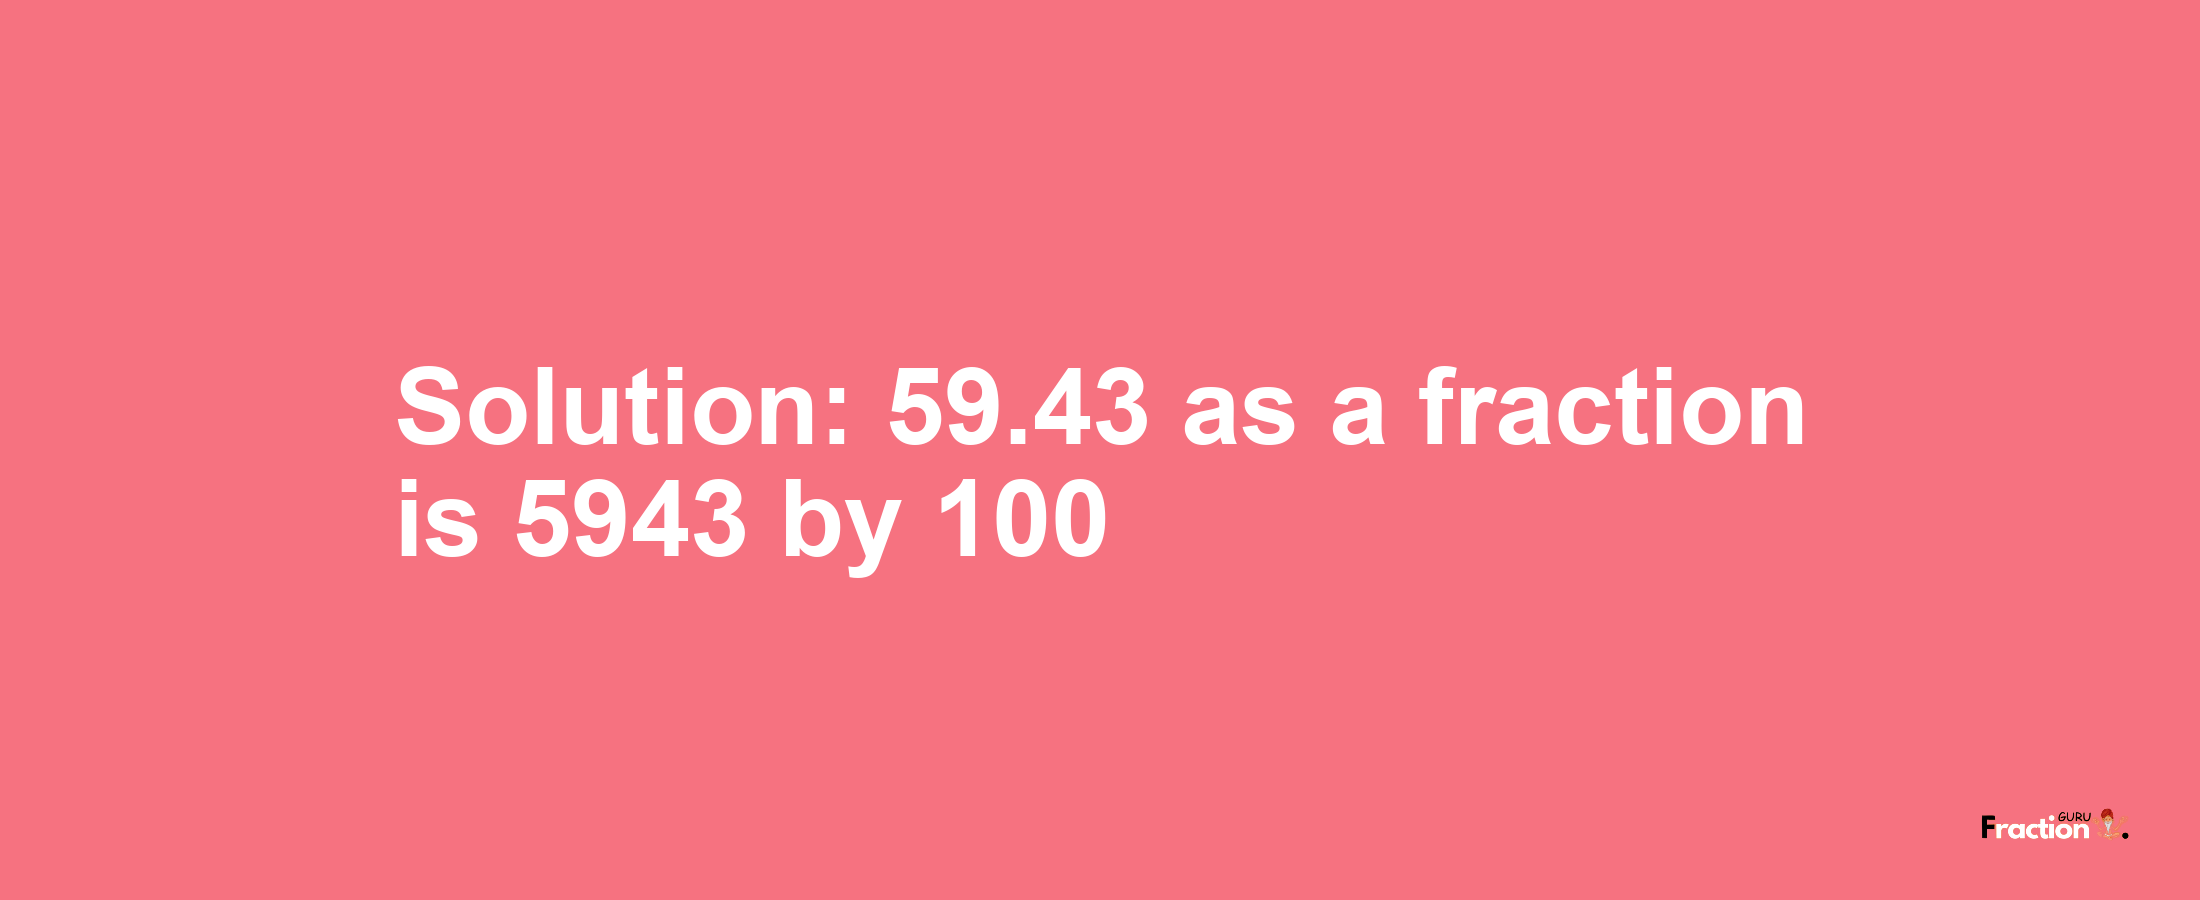 Solution:59.43 as a fraction is 5943/100